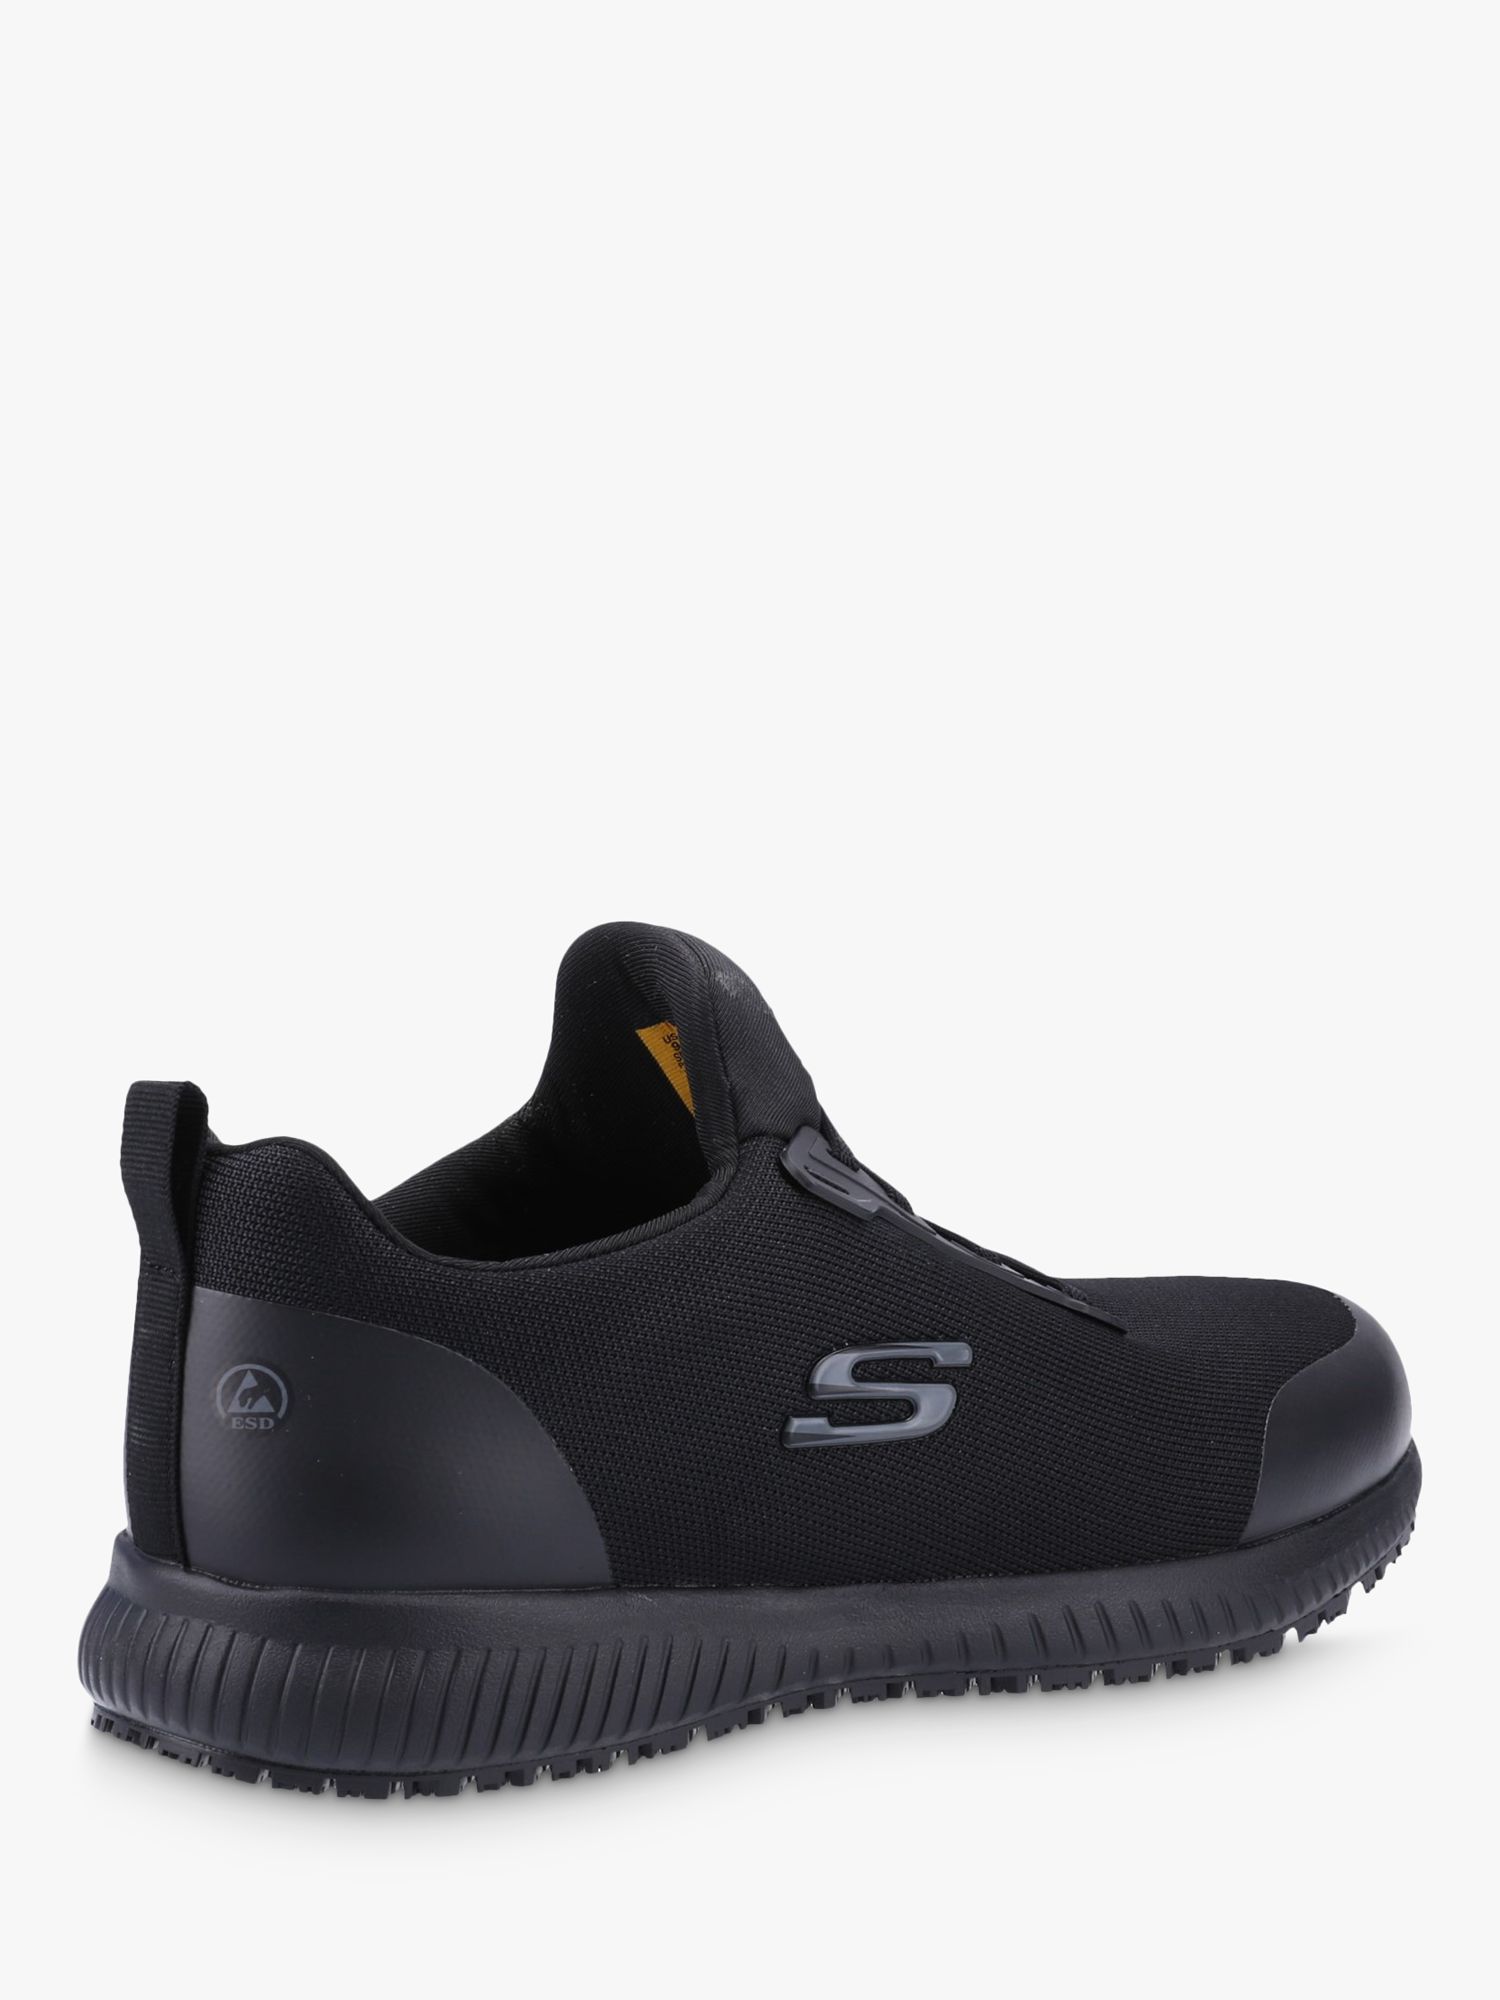 Skechers Squad SR Lace Up Trainers, Black at John Lewis & Partners